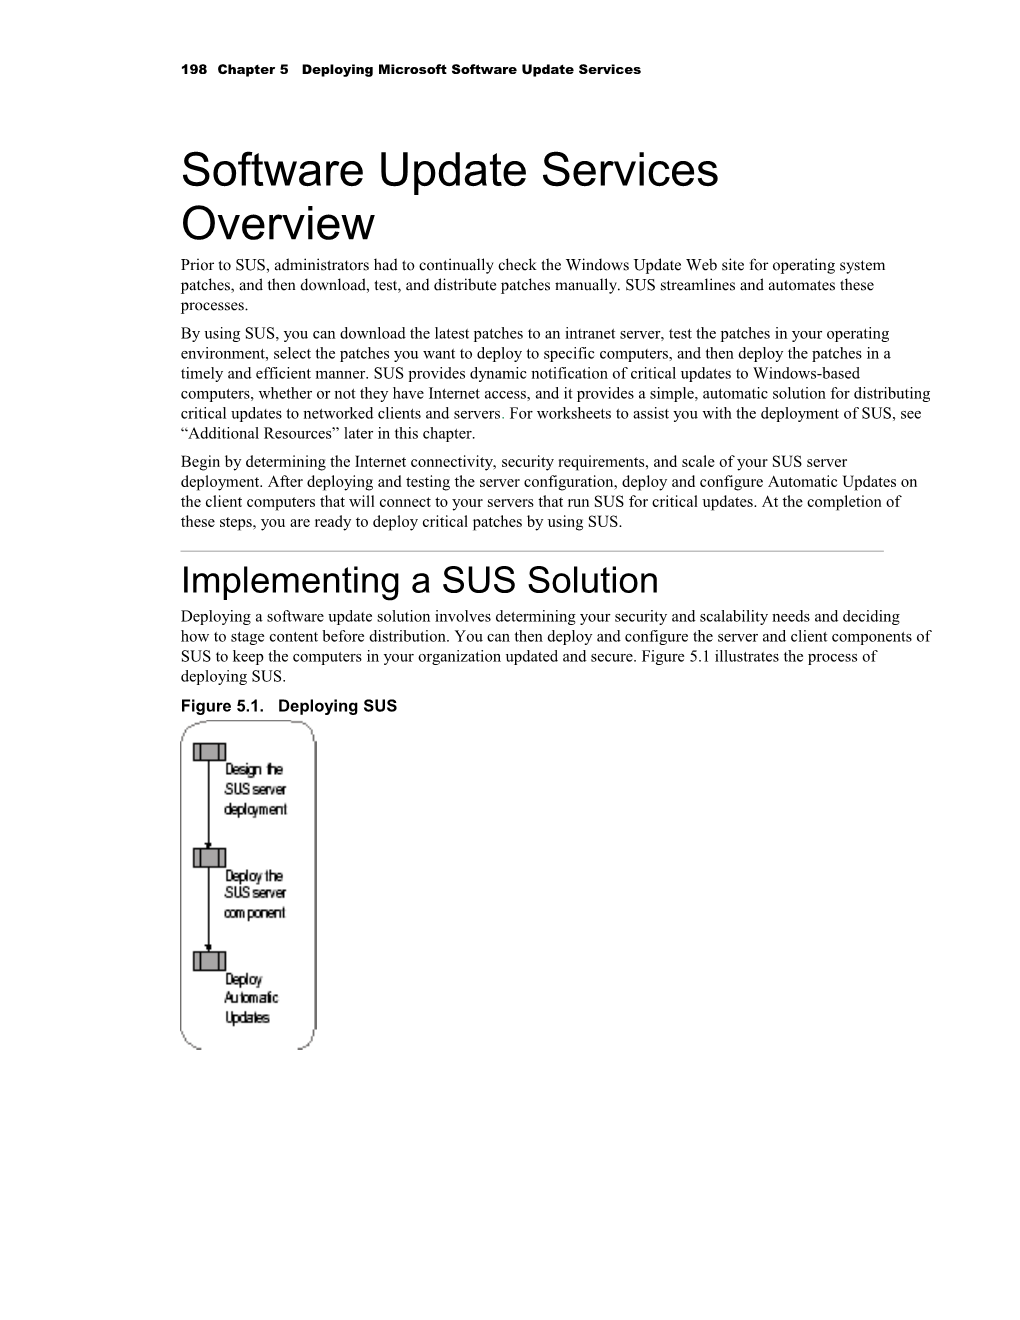 07 CHAPTER 5 Deploying Microsoft Software Update Services